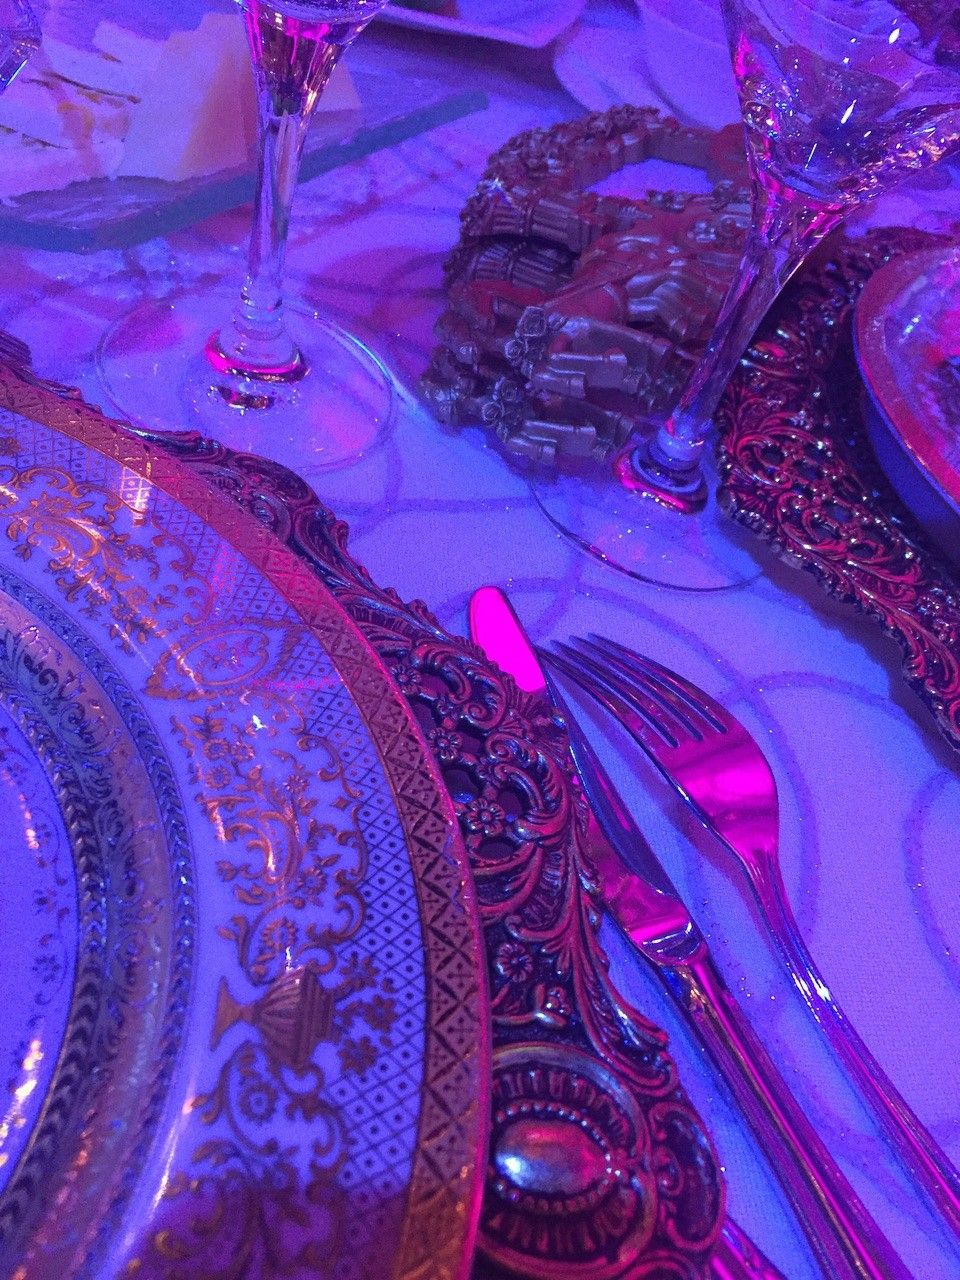 A fancy table setting with plates and silverware - Champagne